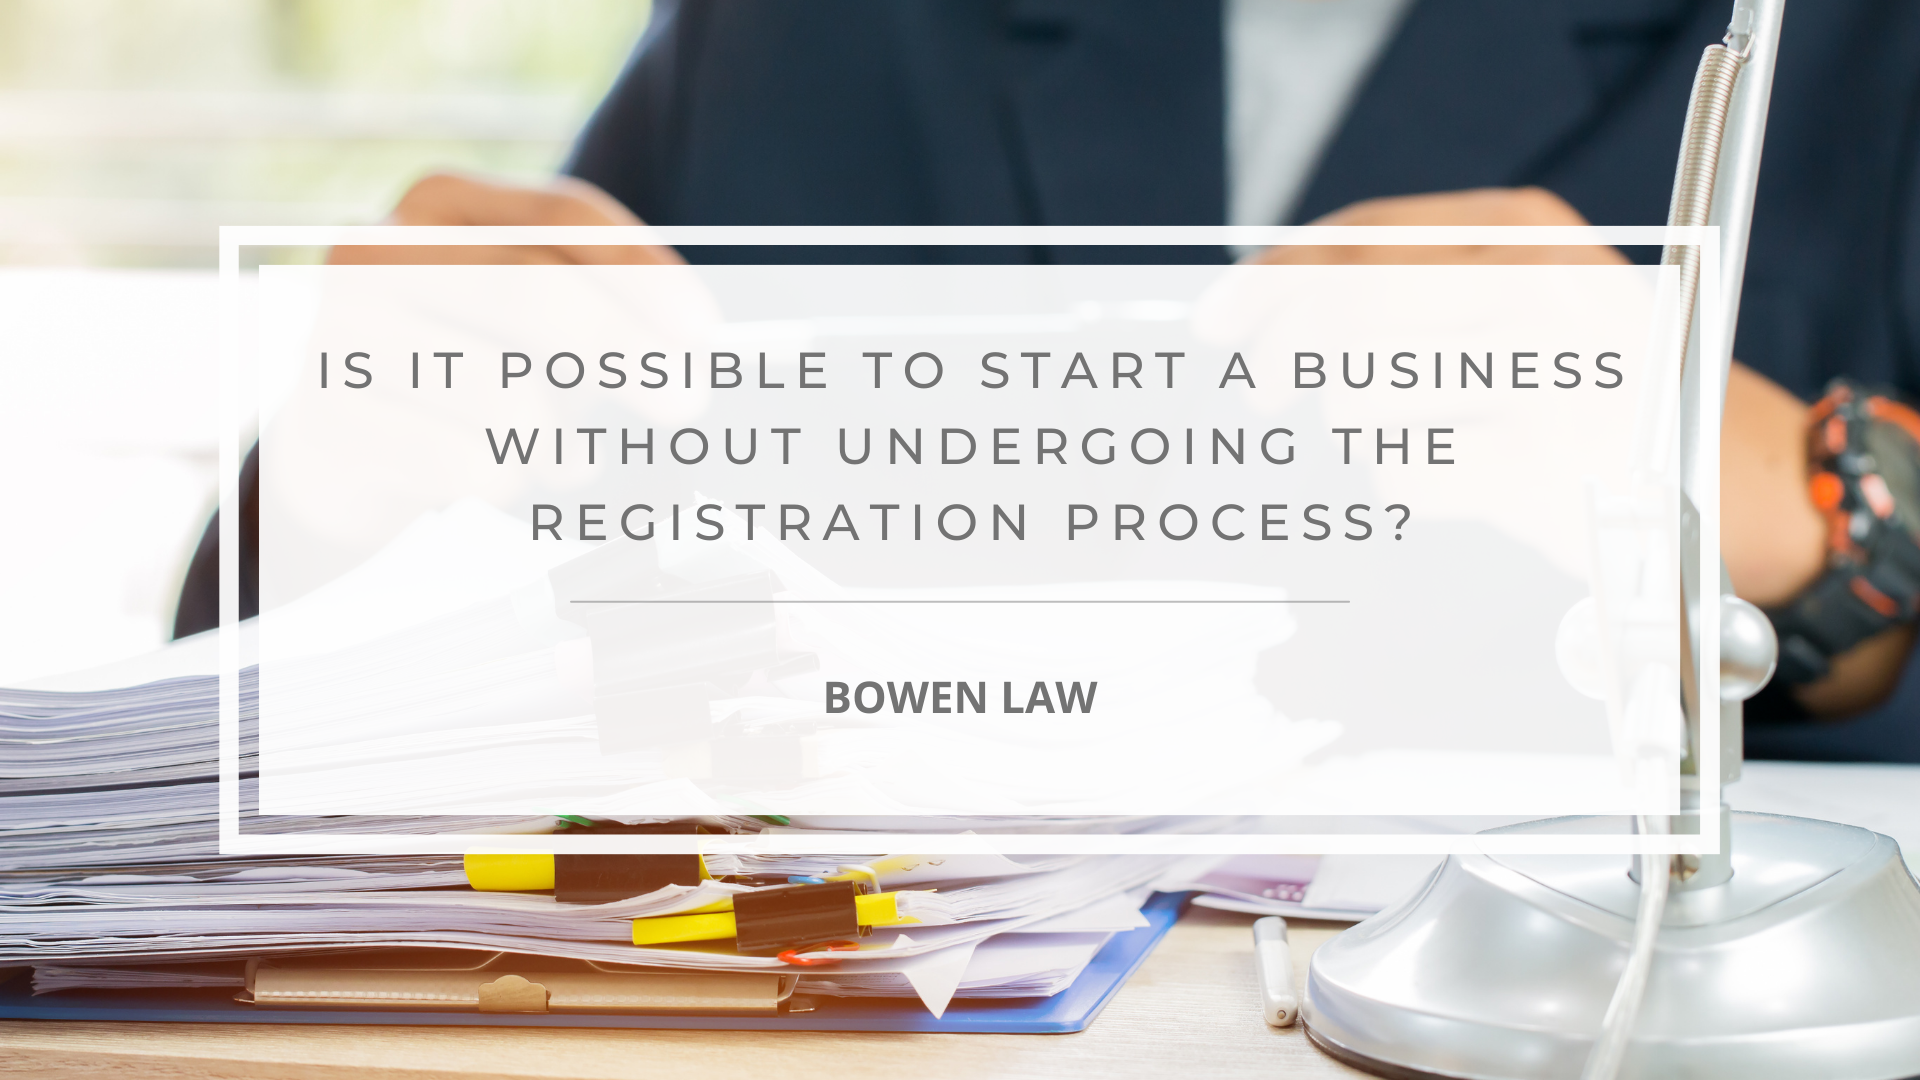 Featured image of is it possible to start a business without undergoing the registration process?